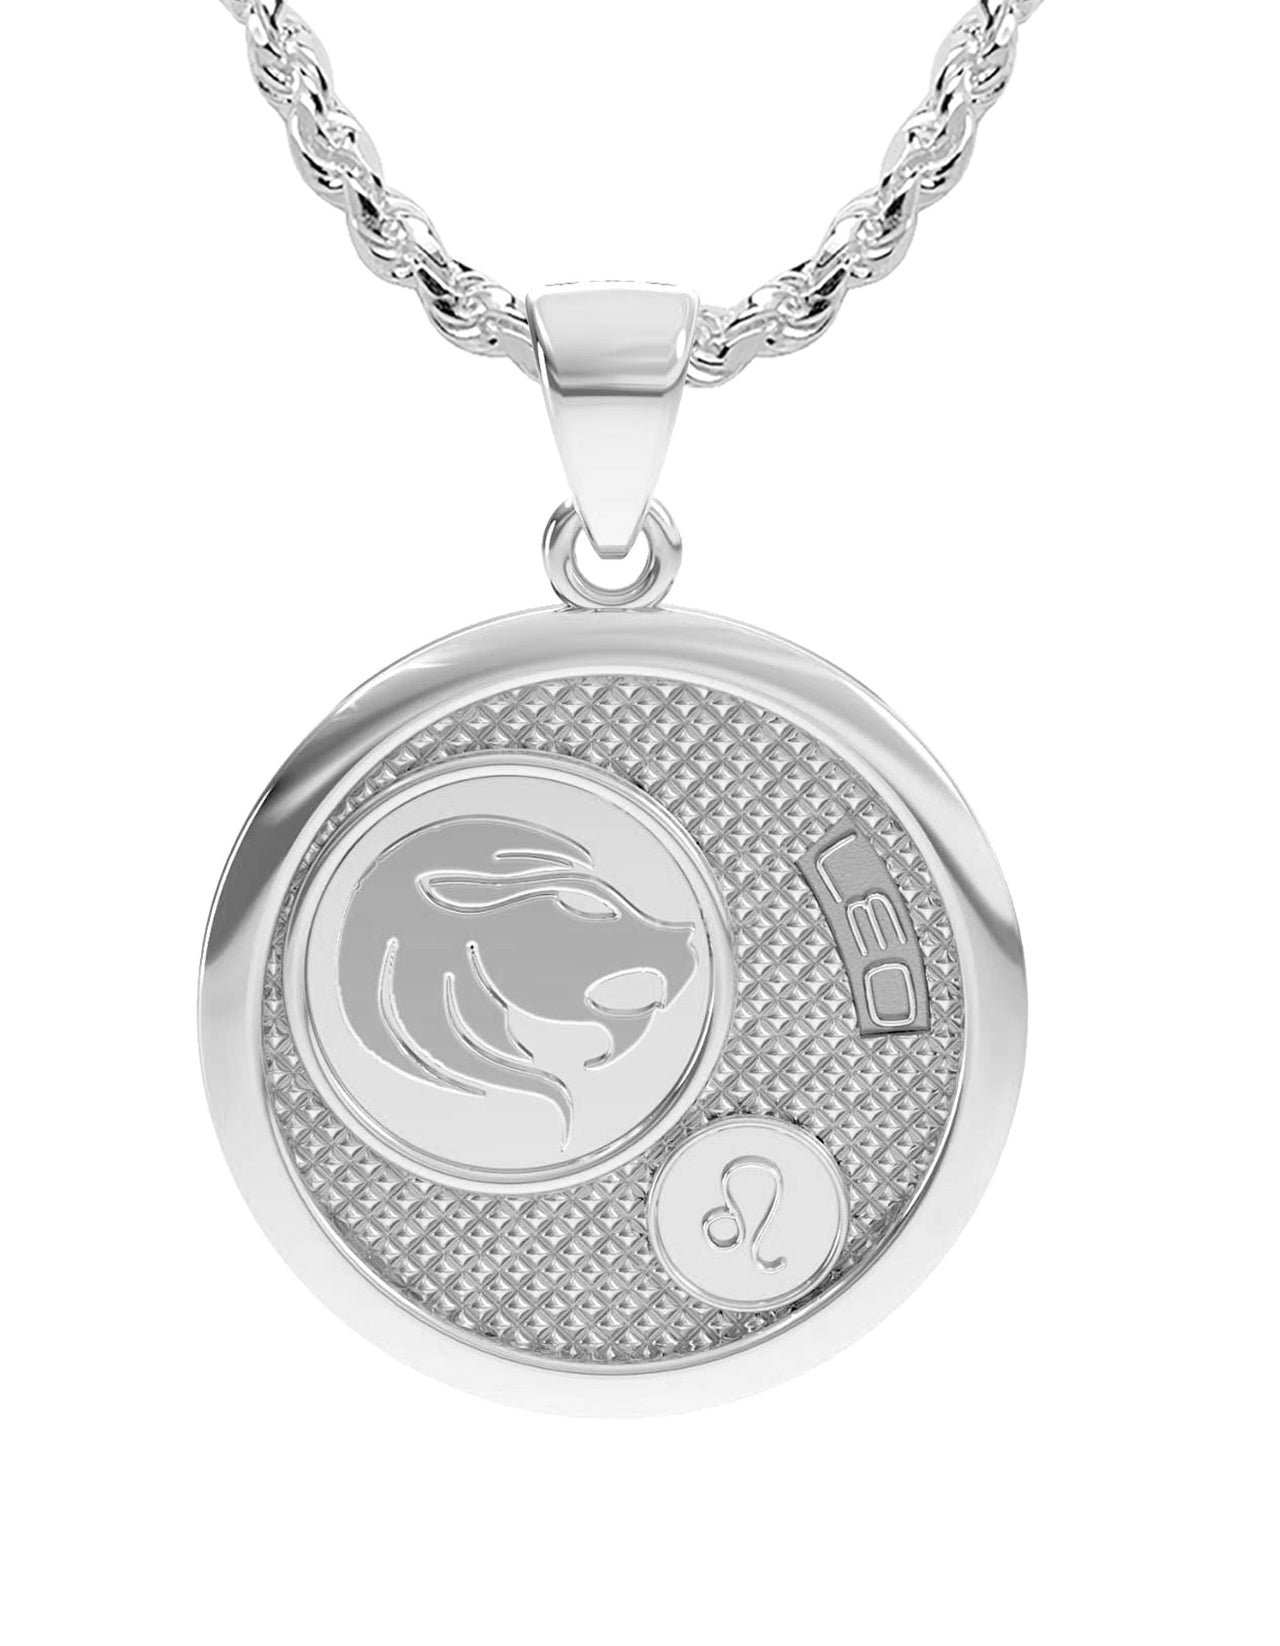 Ladies 925 Sterling Silver Round Leo Zodiac Polished Finish Pendant Necklace, 25mm